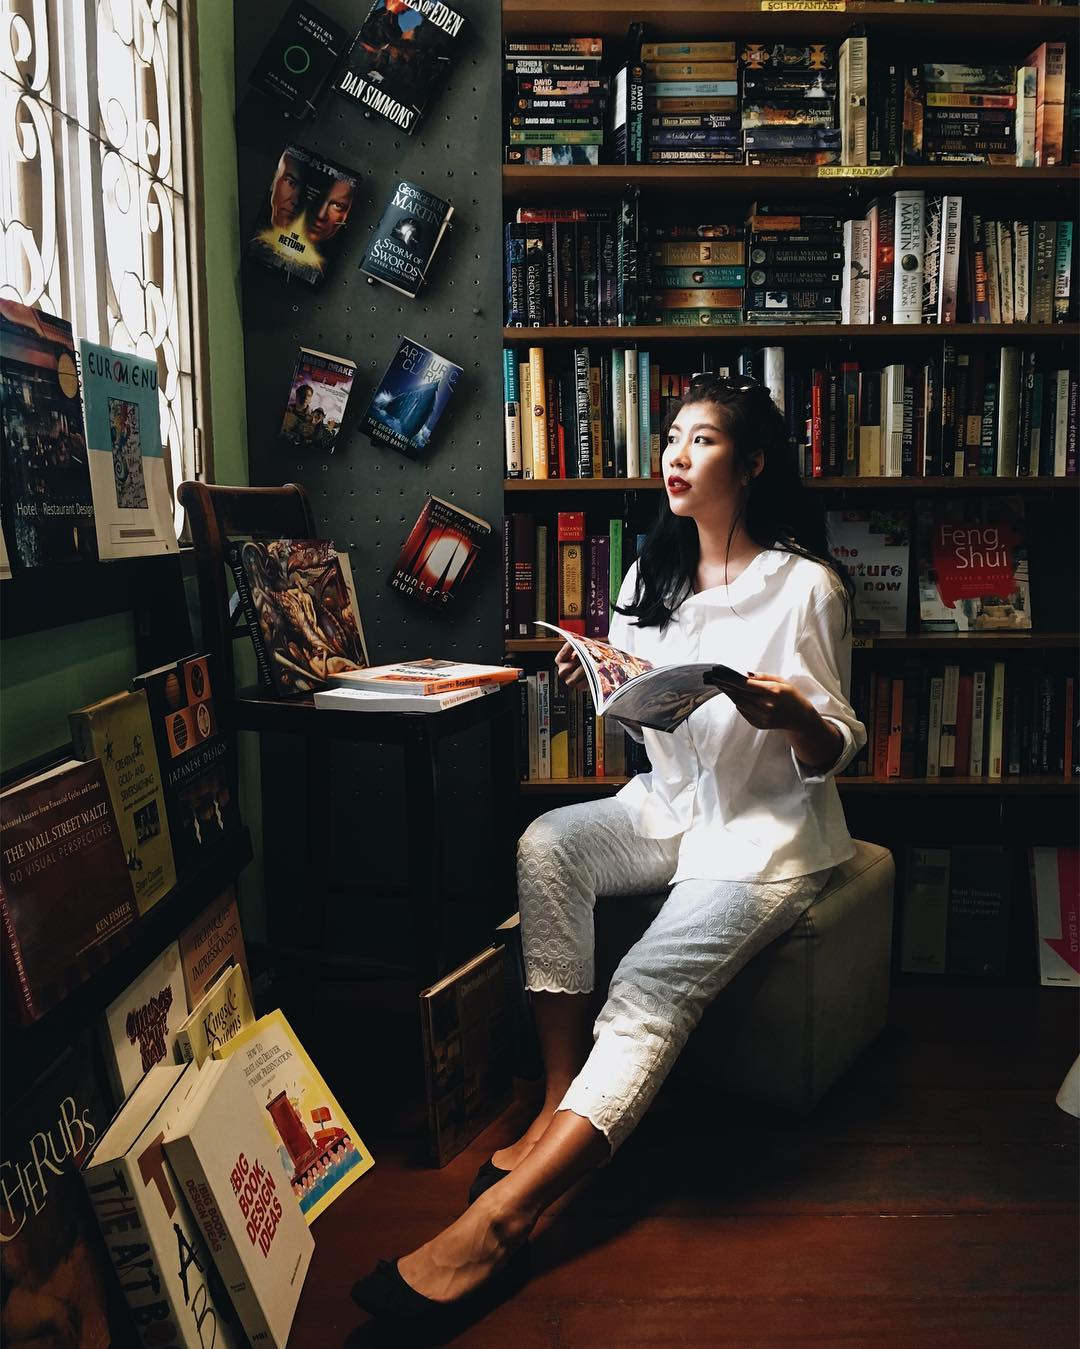 Bangkok’s Most Popular Secondhand Bookshop Is Having A End-Year Sale With Books From $0.30